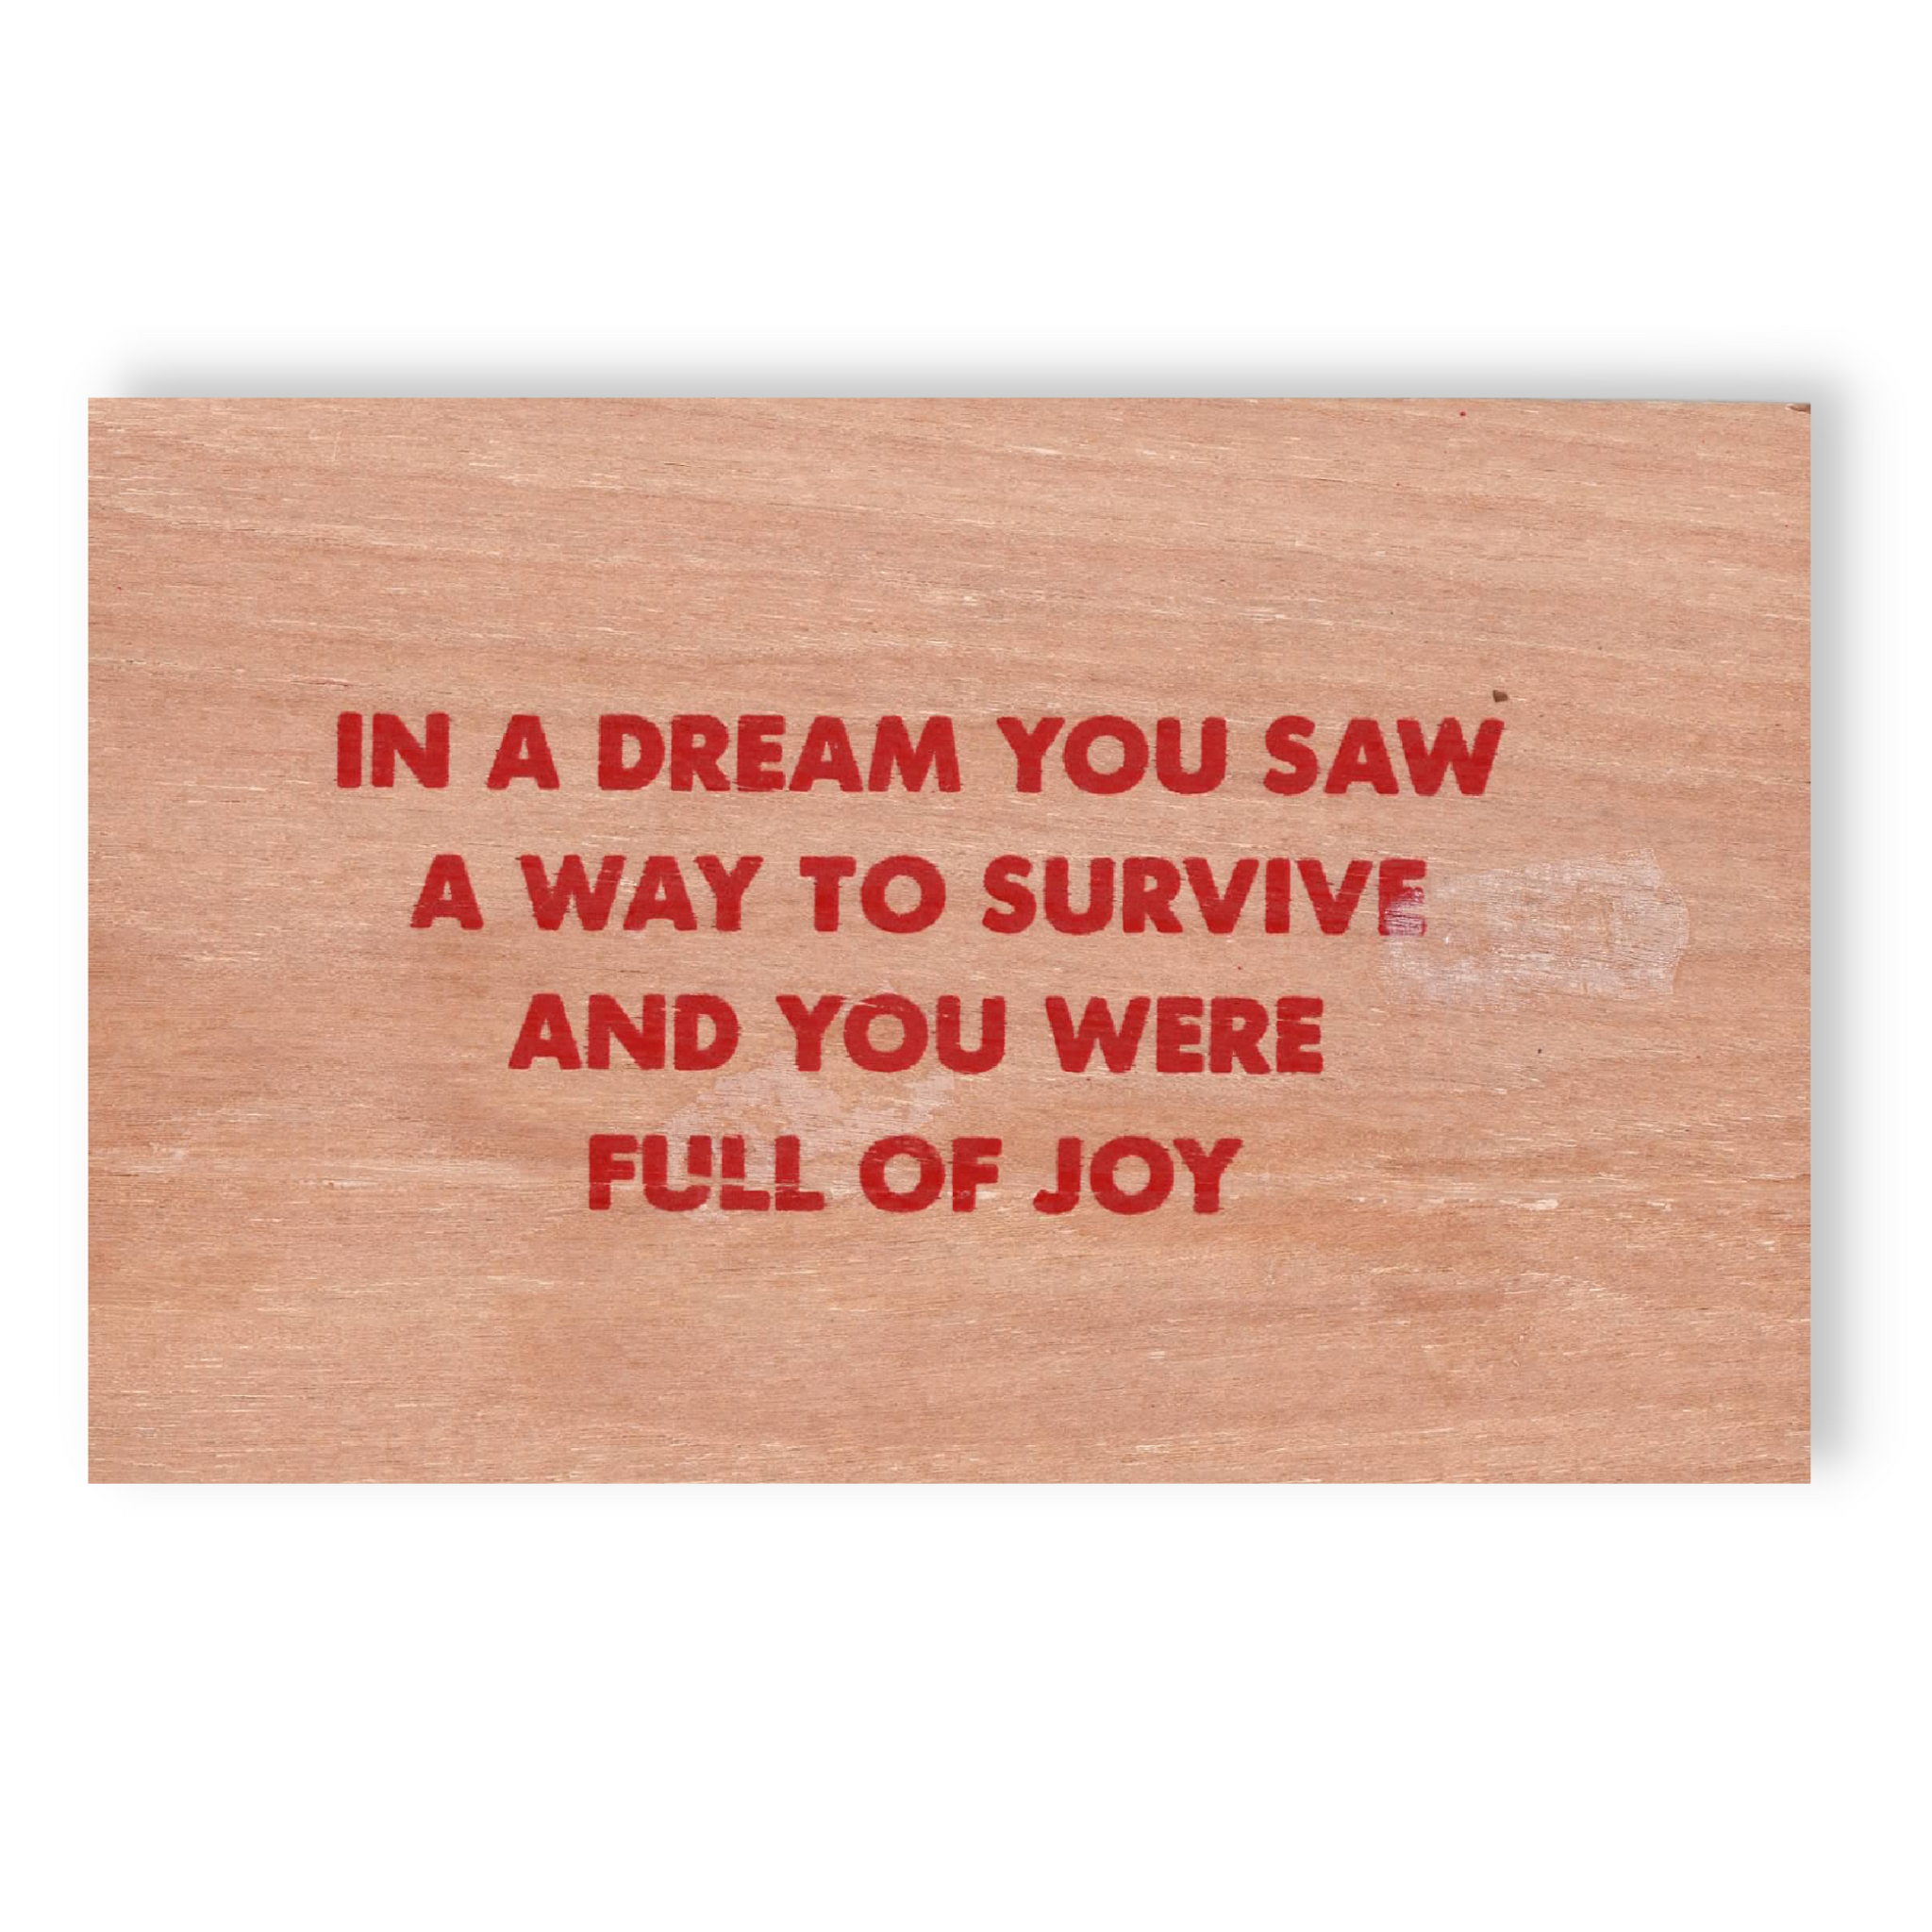 Jenny Holzer - Truism [In A Dream You Saw a Way To Survive And You Were Full Of Joy]